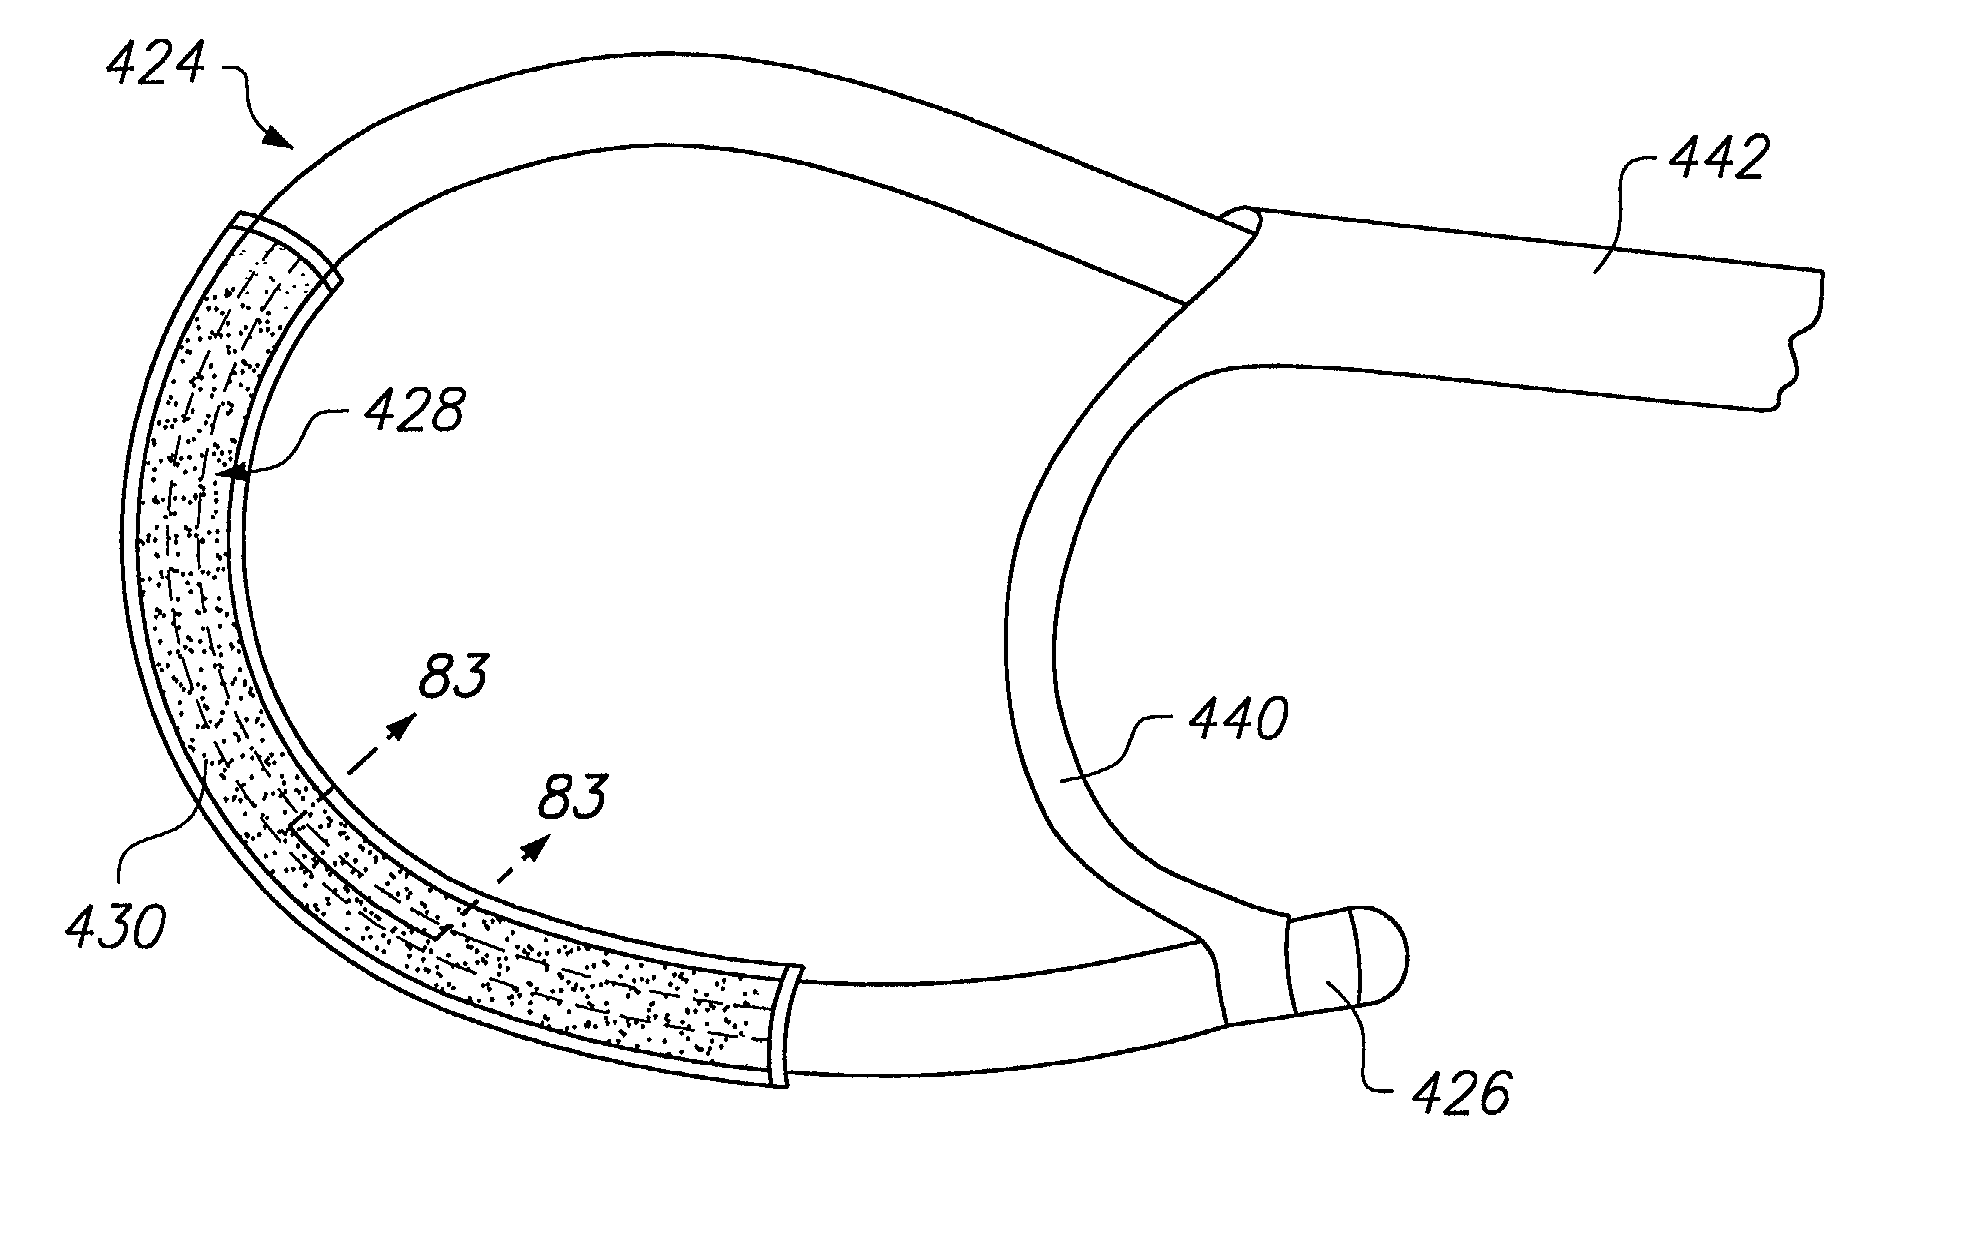 Loop structures for supporting multiple electrode elements